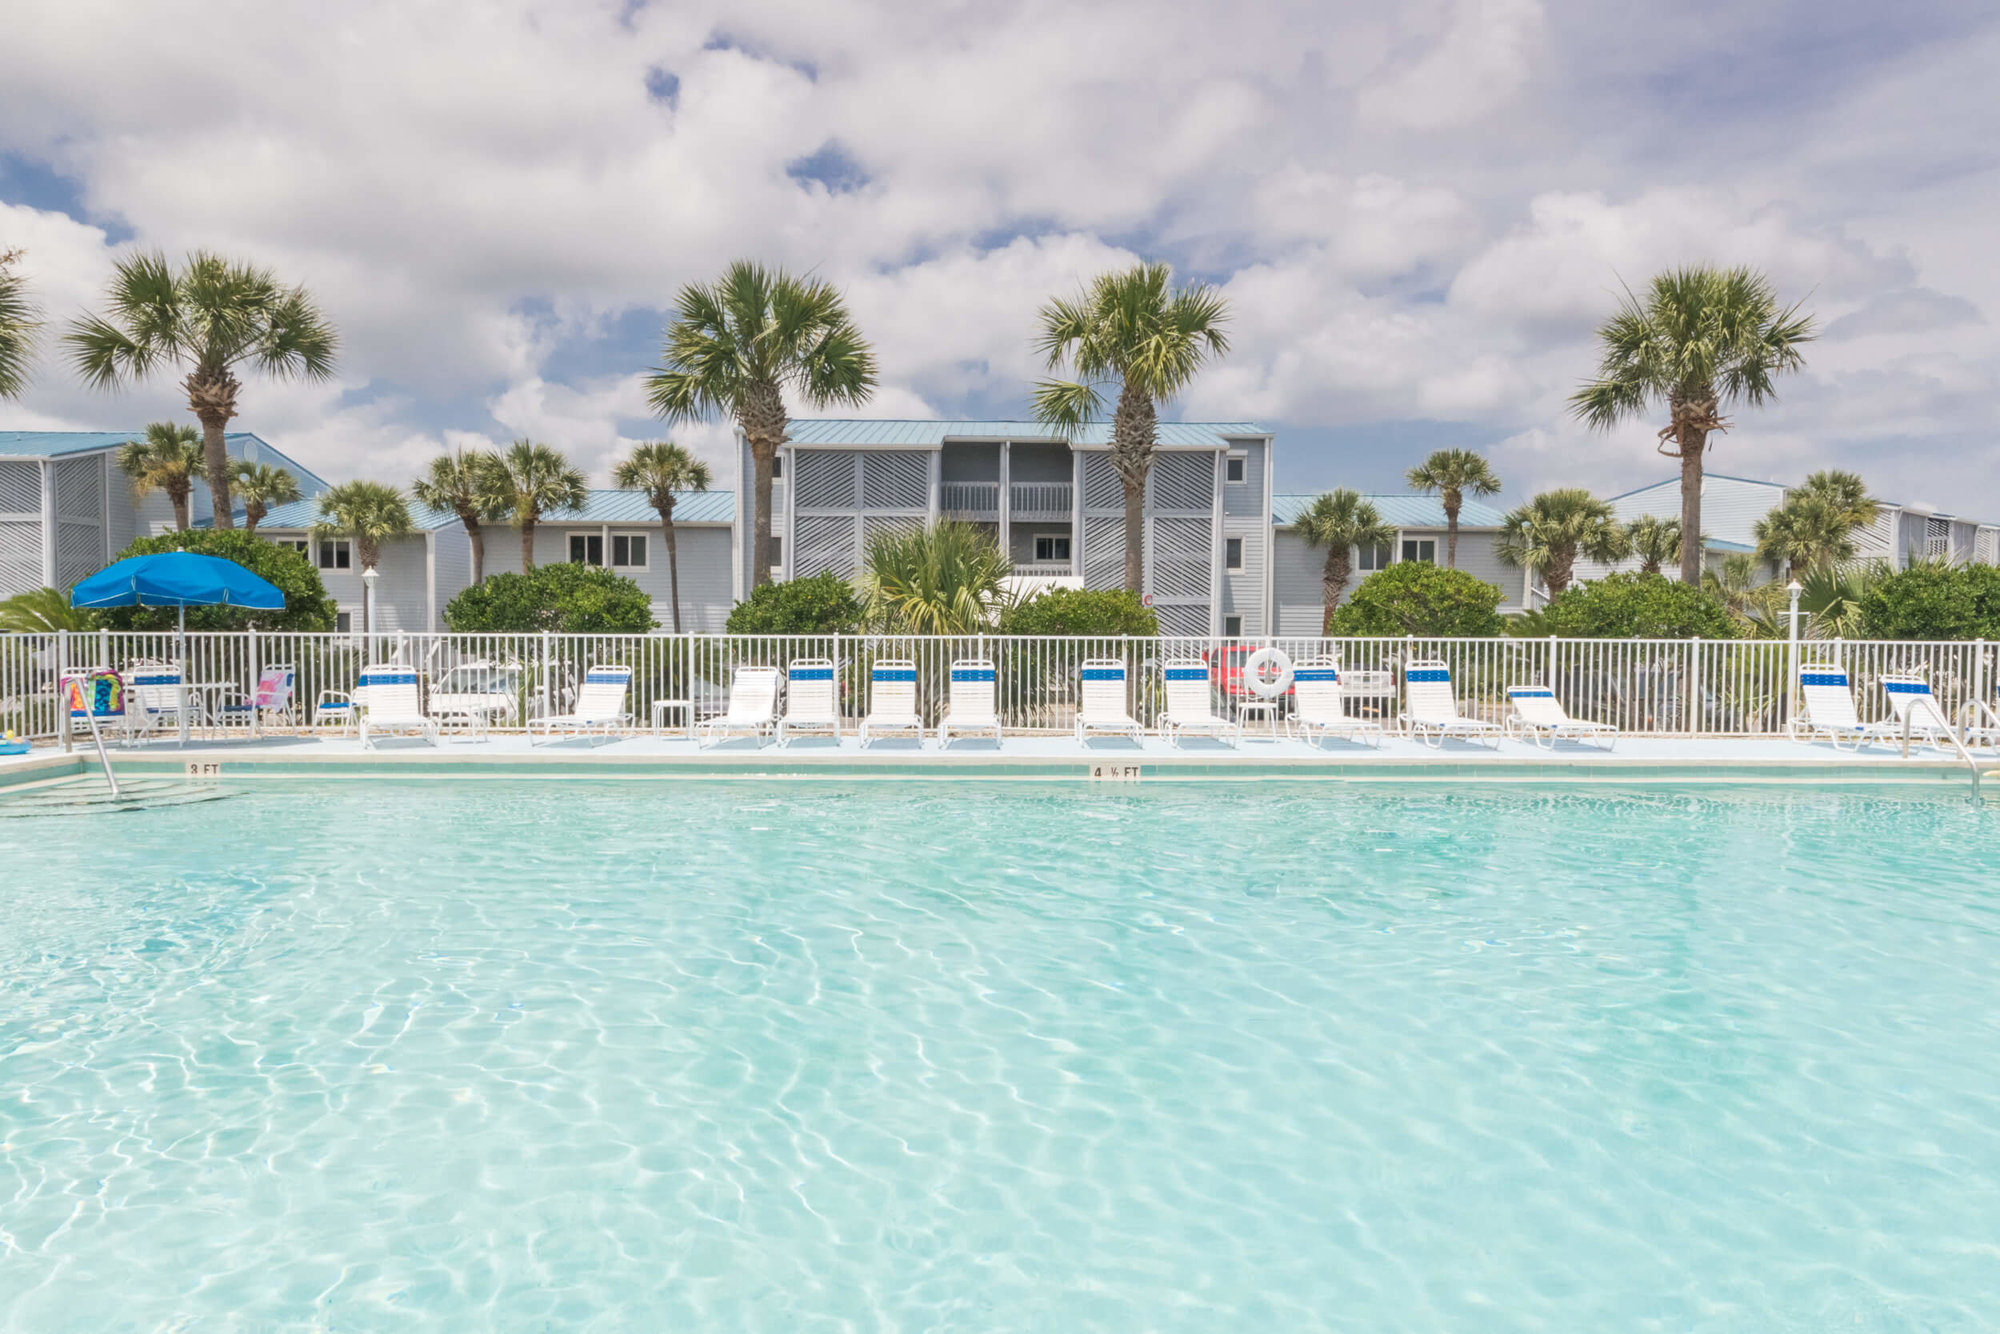 Large outdoor pool and sundeck at Sundown condos in Perdido Key